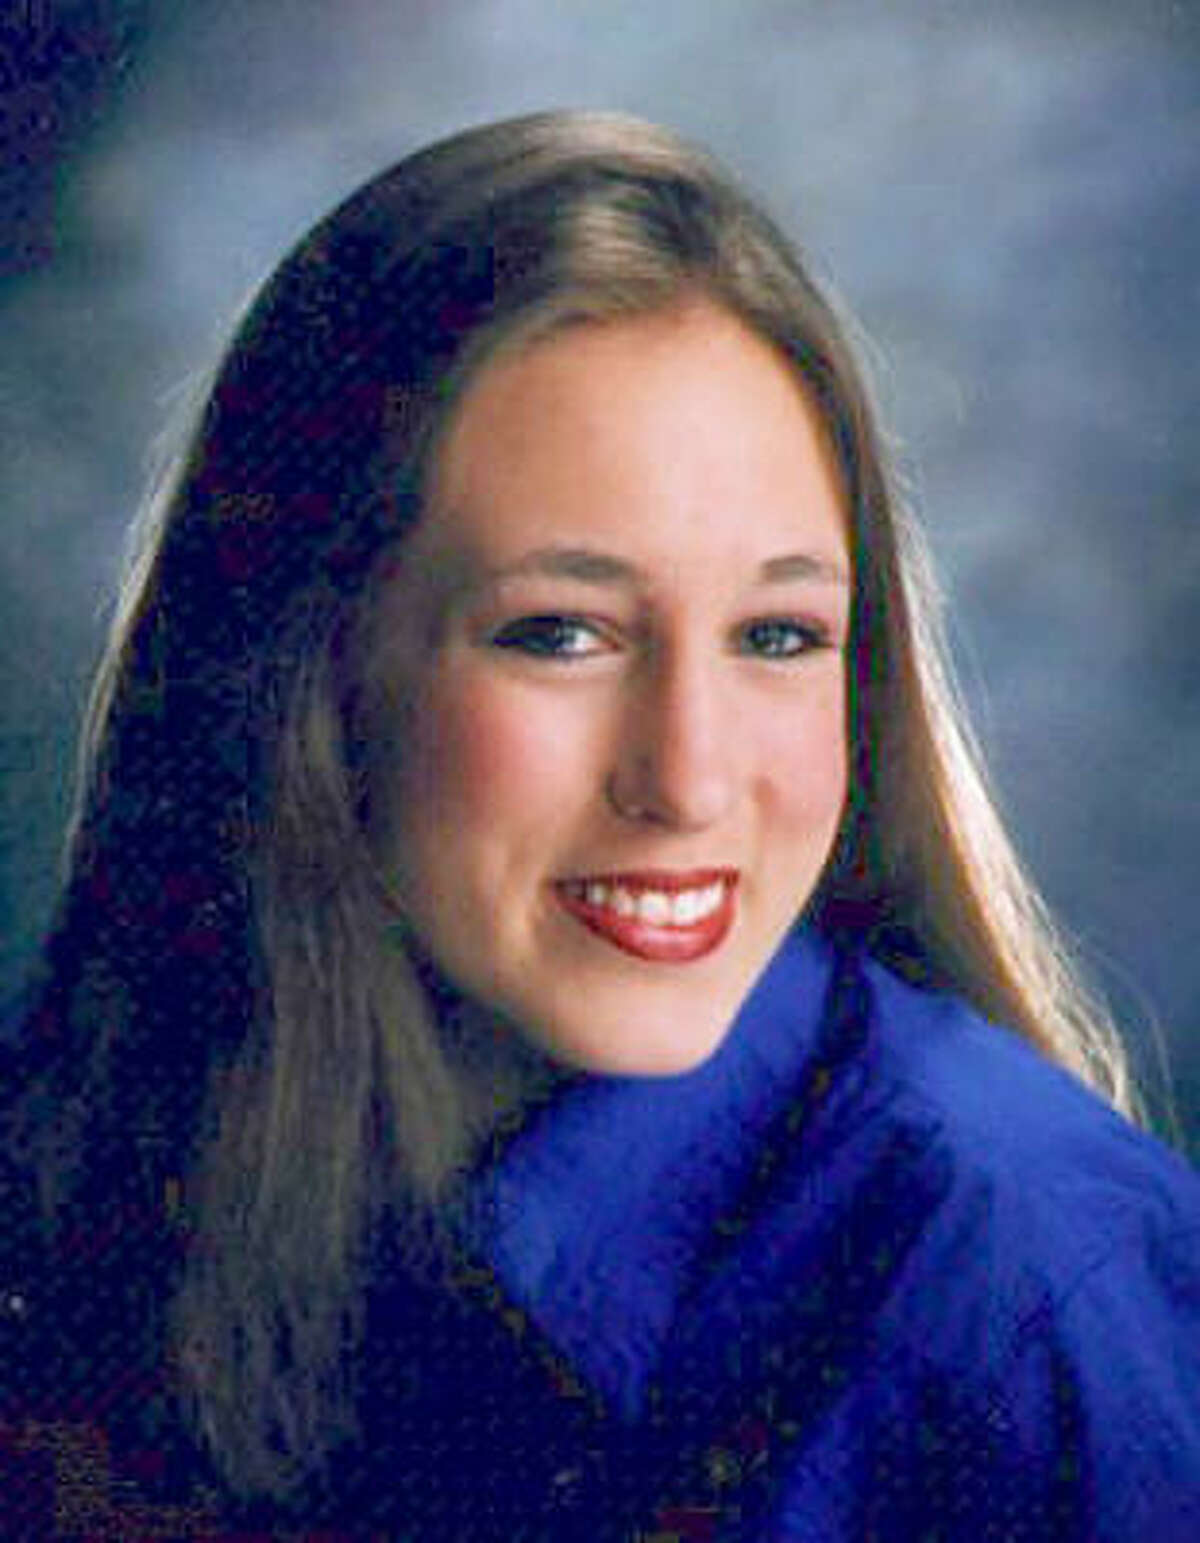 Nineteen-year-old Melissa Trotter was strangled after disappearing on Dec. 8, 1998.